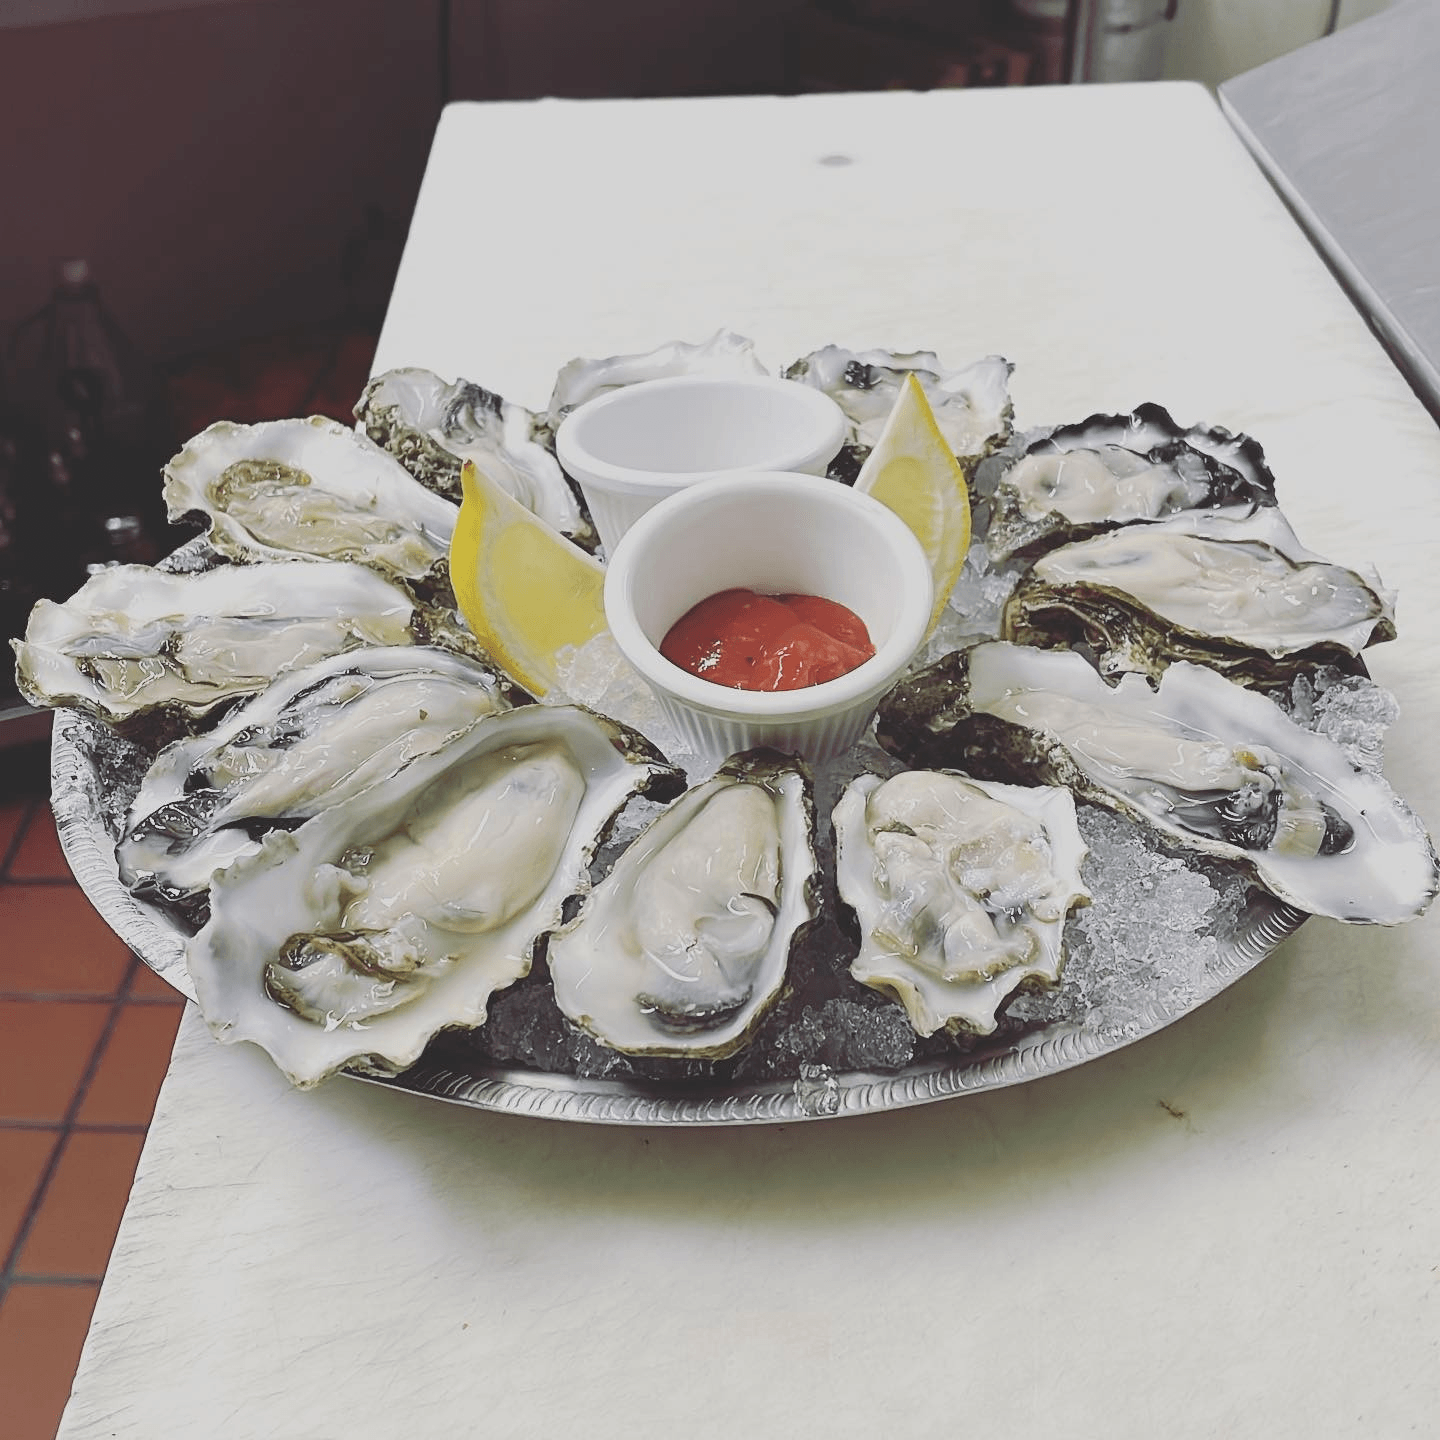 Deliciously fresh oysters are waiting for you!